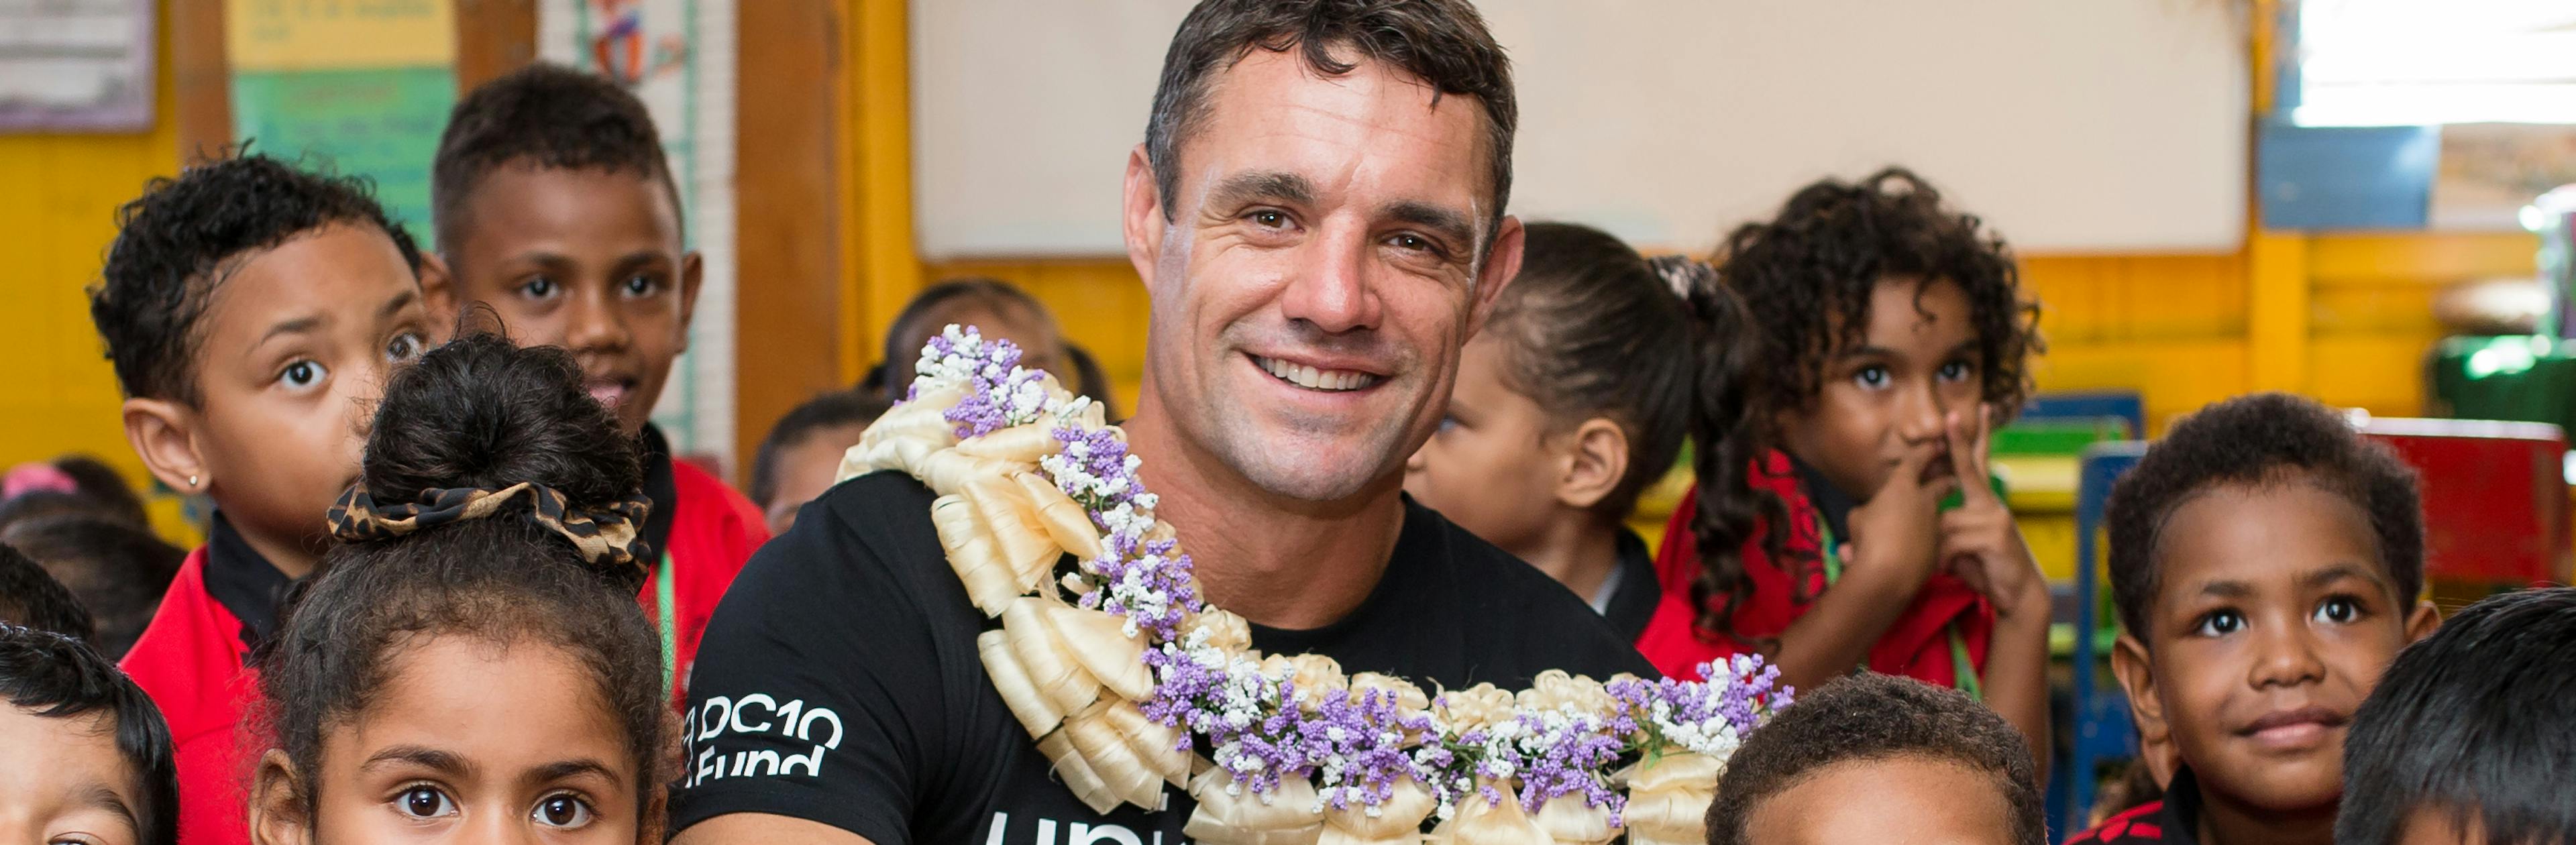 Dan Carter smiles with a group of school students on his trip with DC10 UNICEF to the Pacific